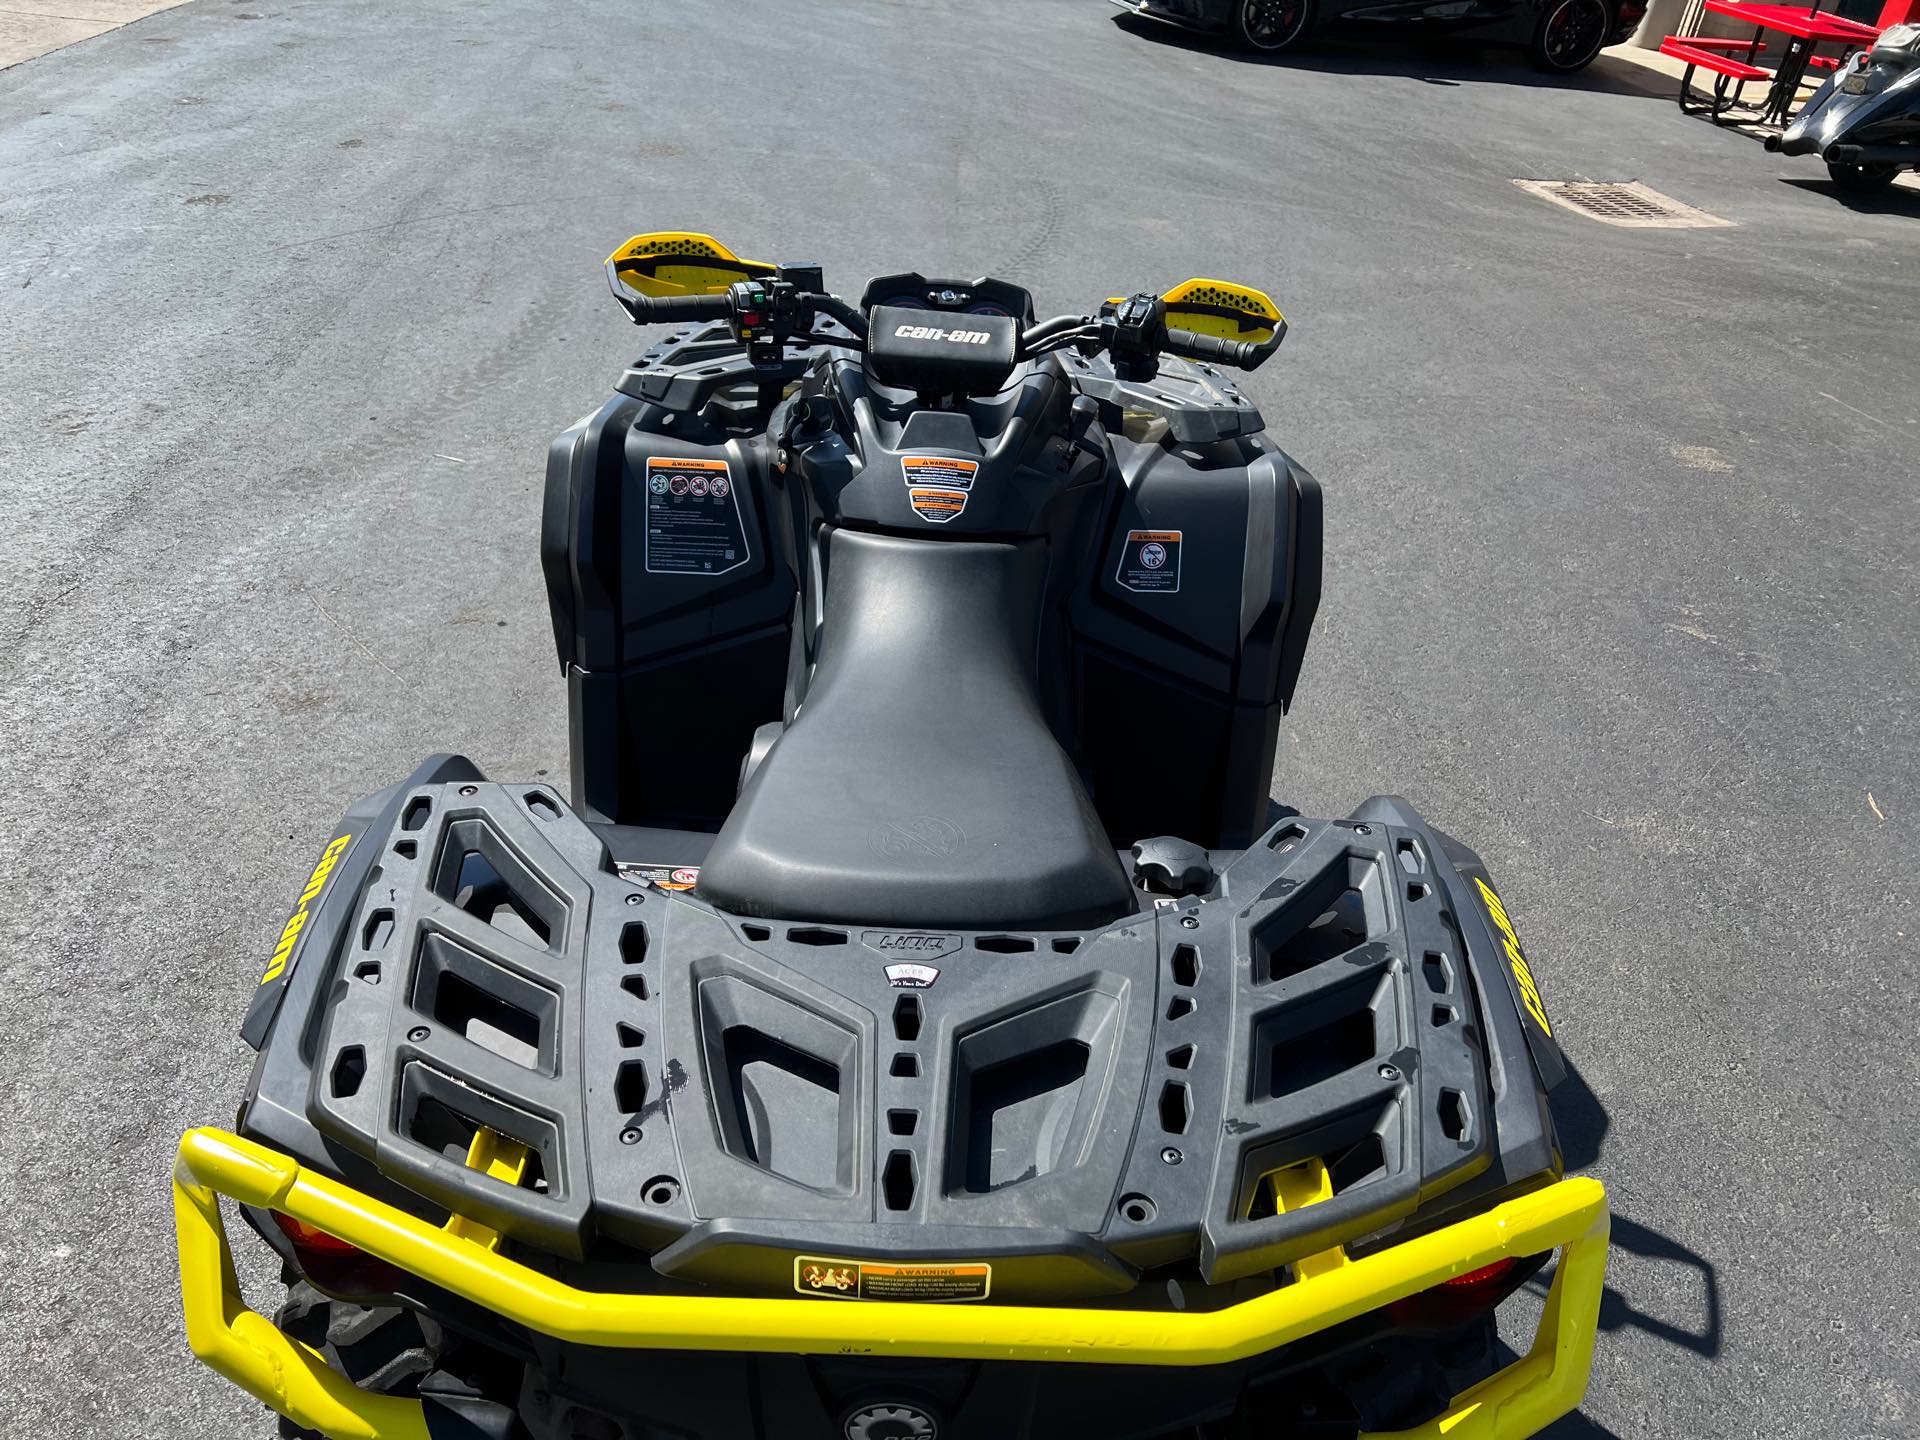 2019 Can-Am Outlander XT-P 1000R at Aces Motorcycles - Fort Collins